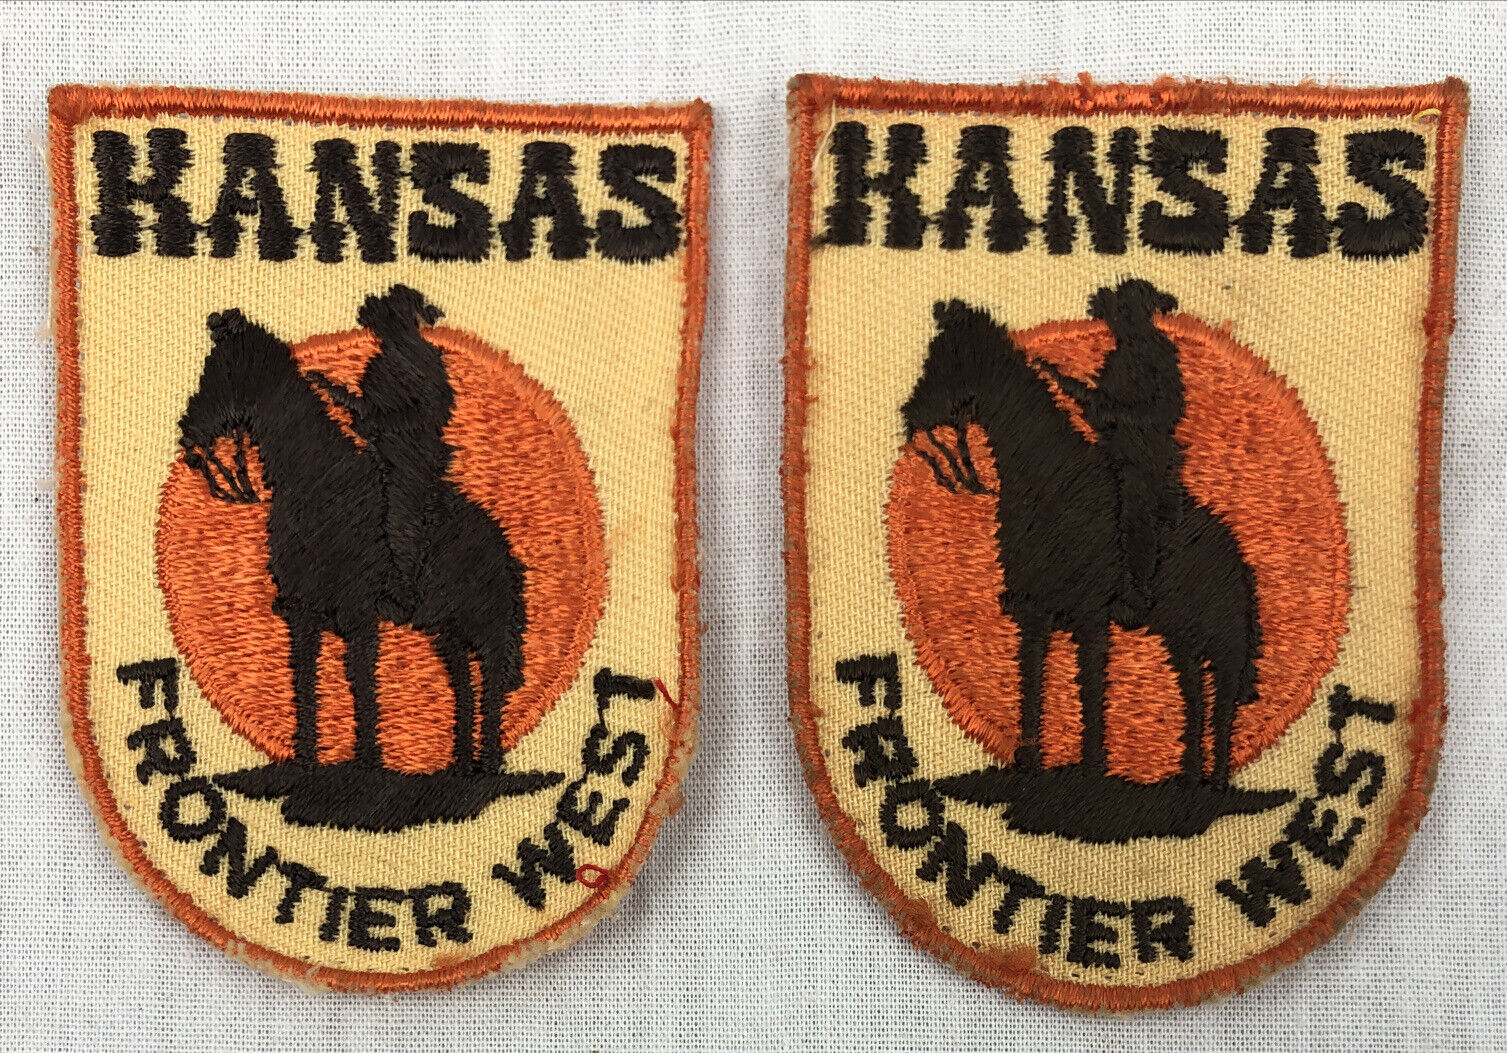 Voyager State Patch Kansas Frontier West Set of 2 ~70\'s Patches Vintage Cowboy